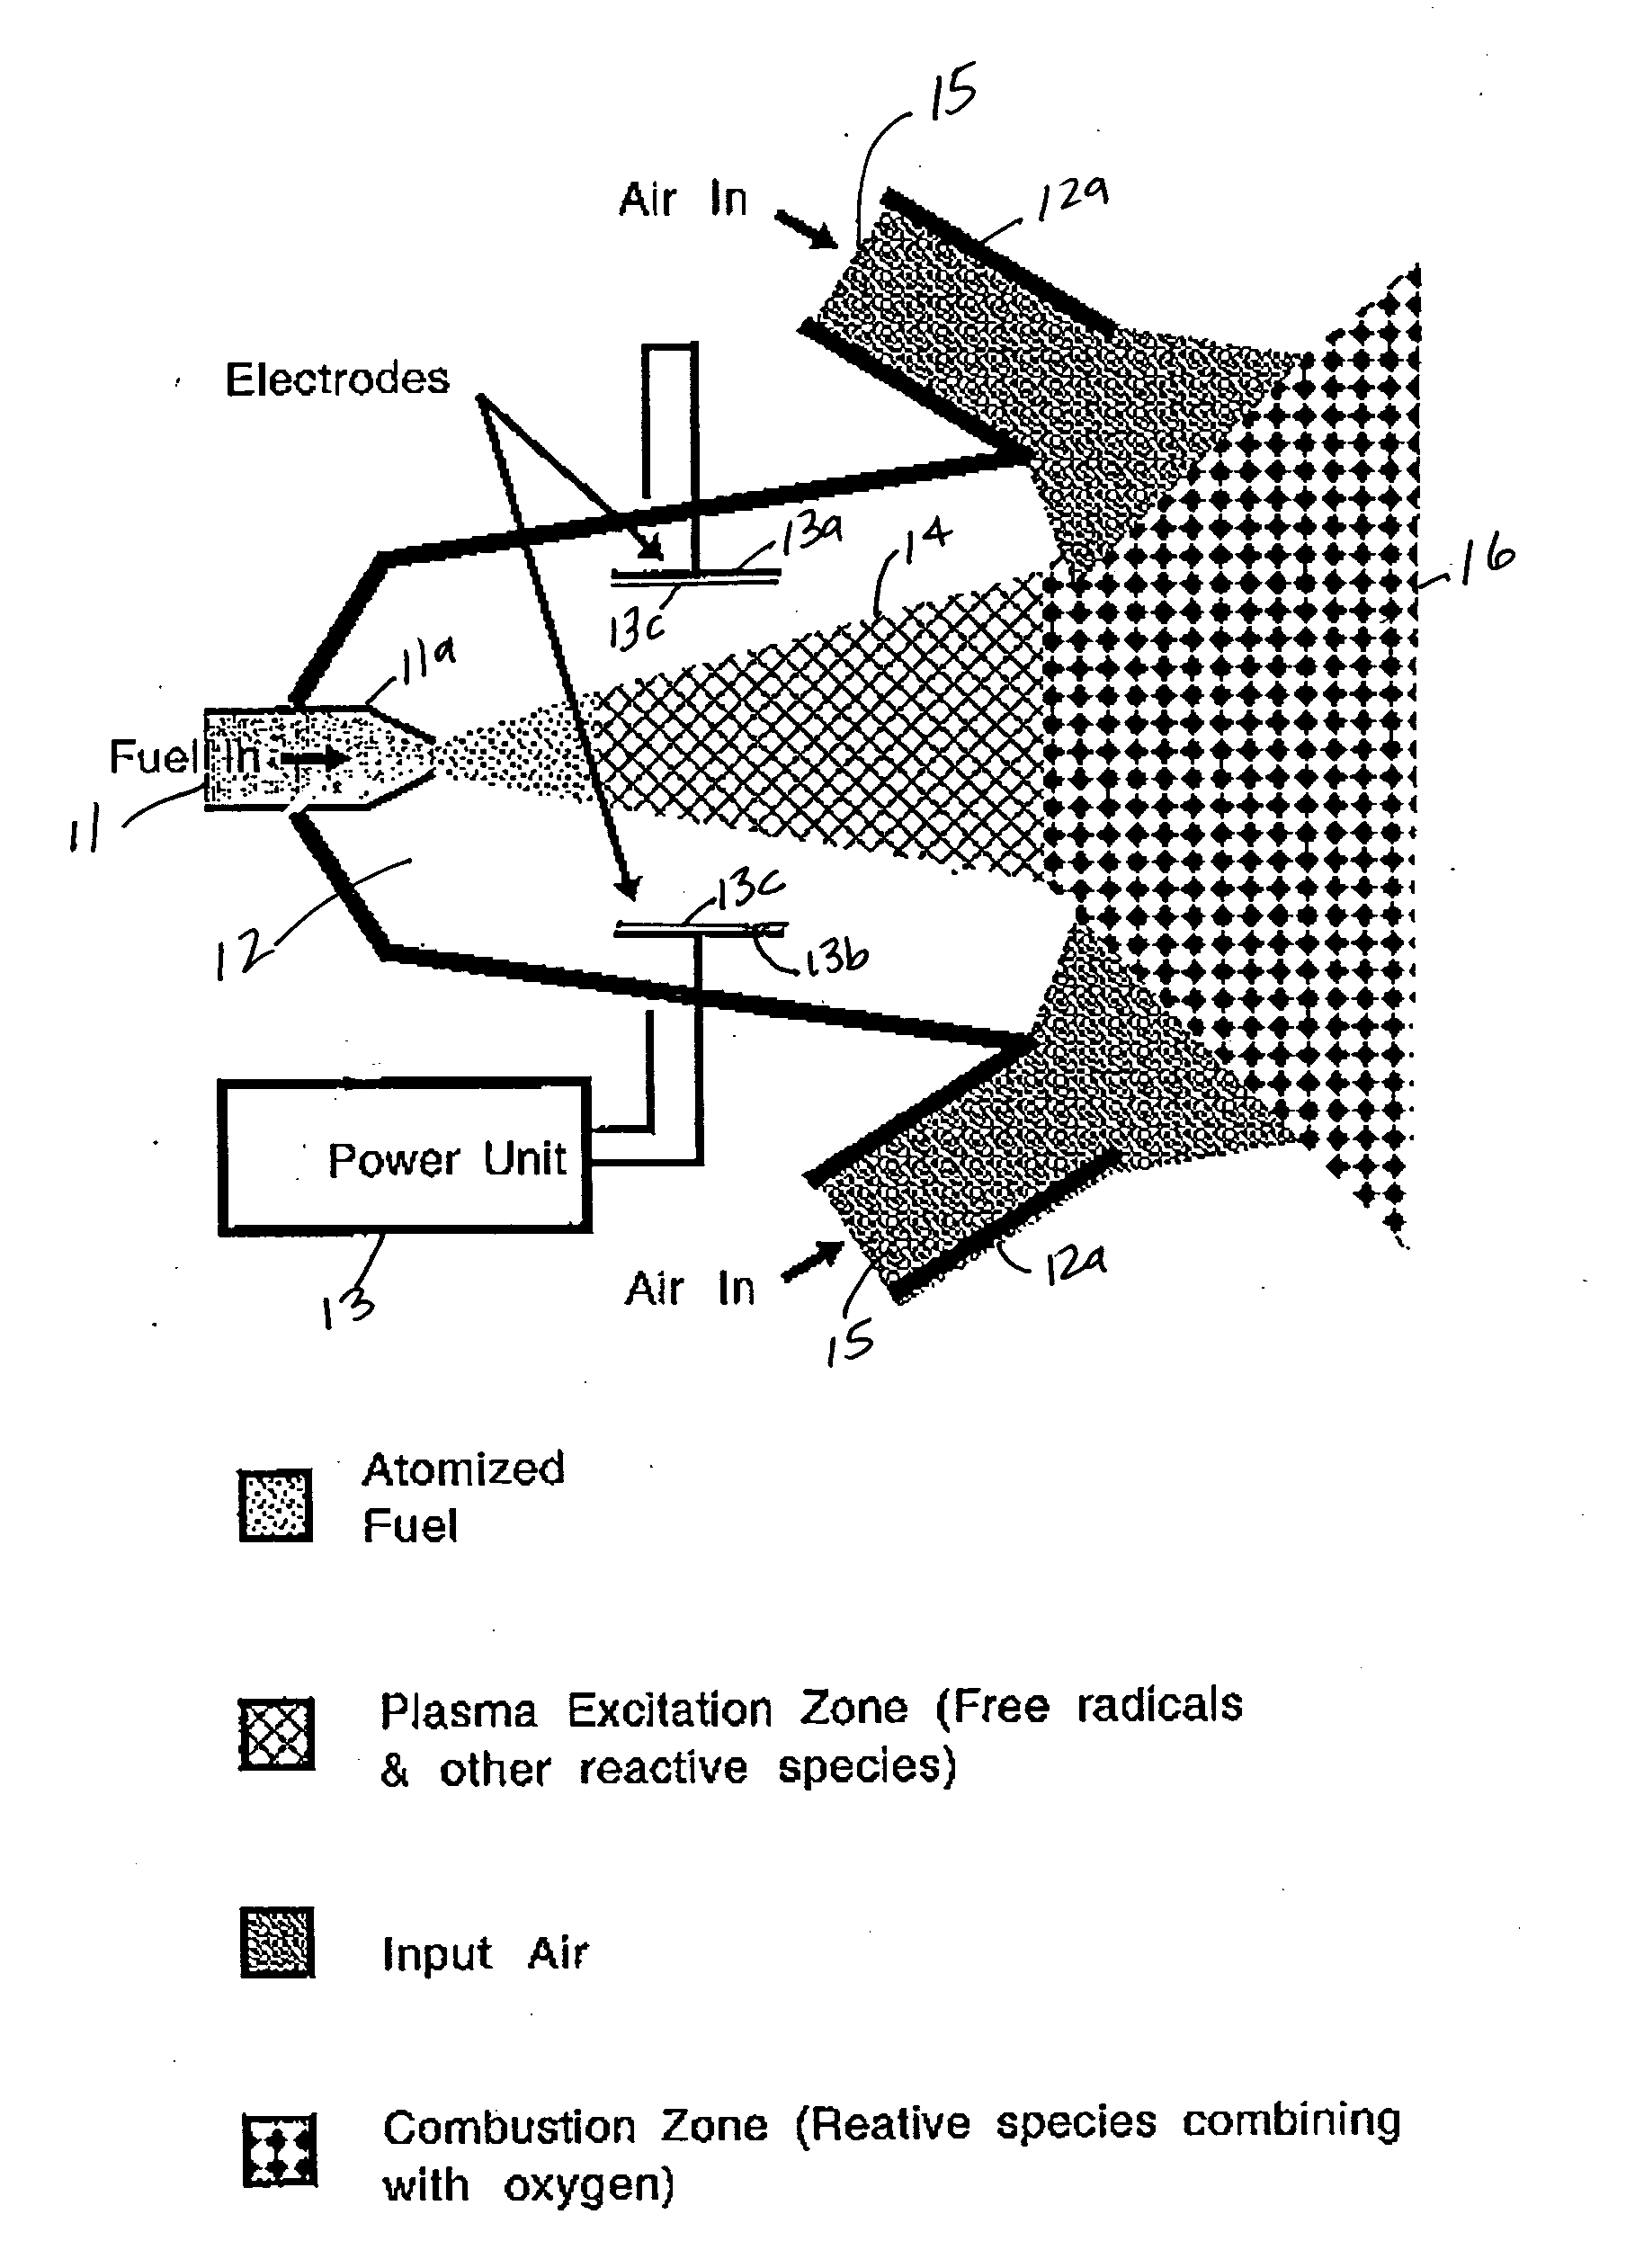 Plasma catalytic fuel injector for enhanced combustion